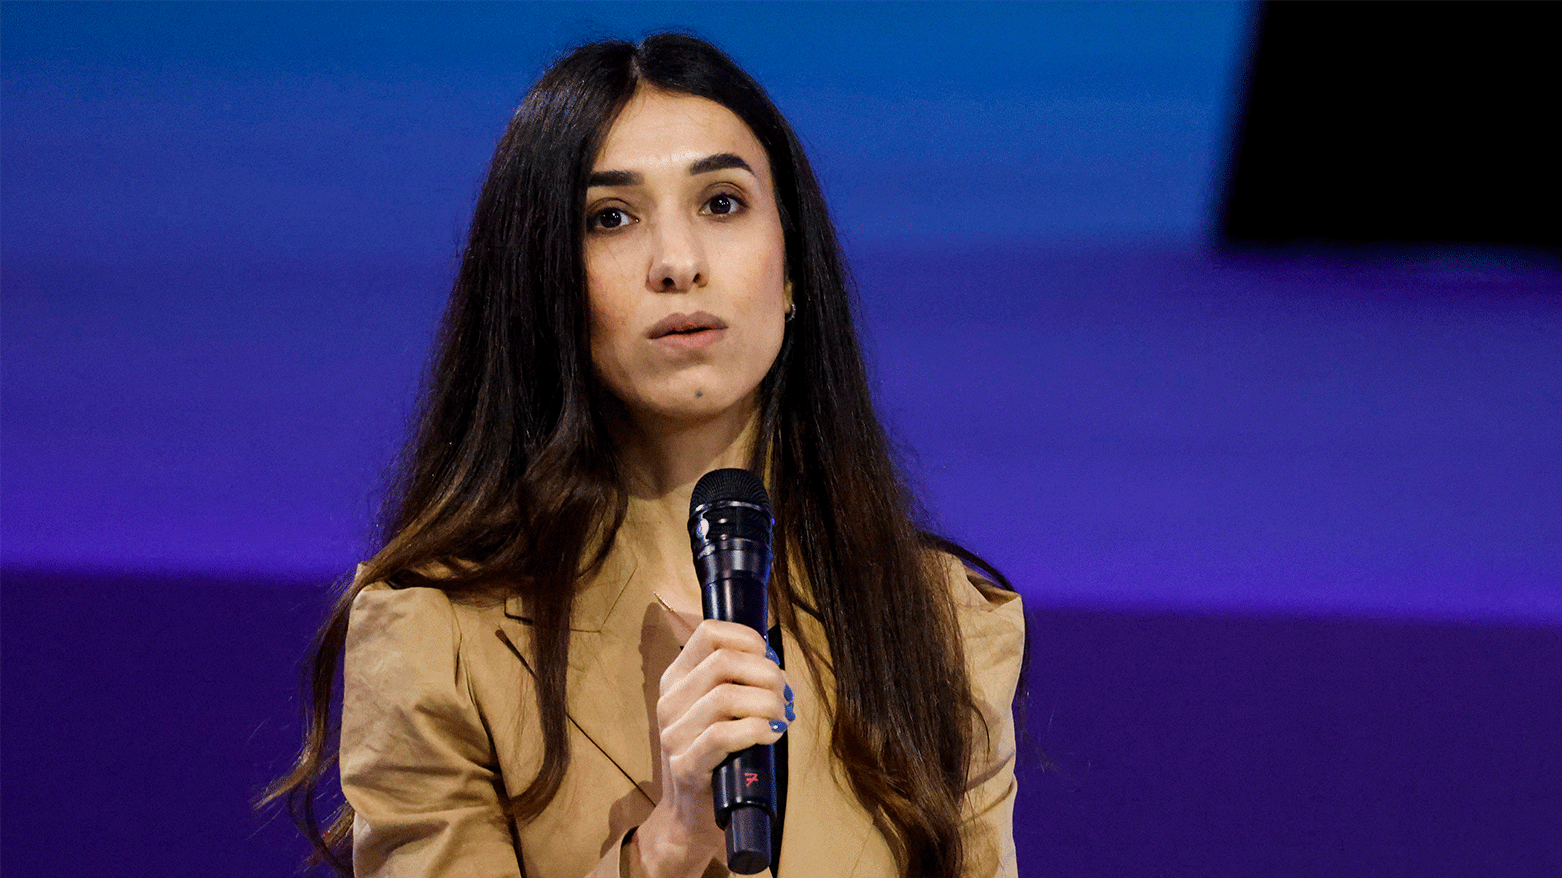 Nobel Peace Prize Nadia Murad delivers a speech during the Generation Equality Forum. (Photo: AFP)